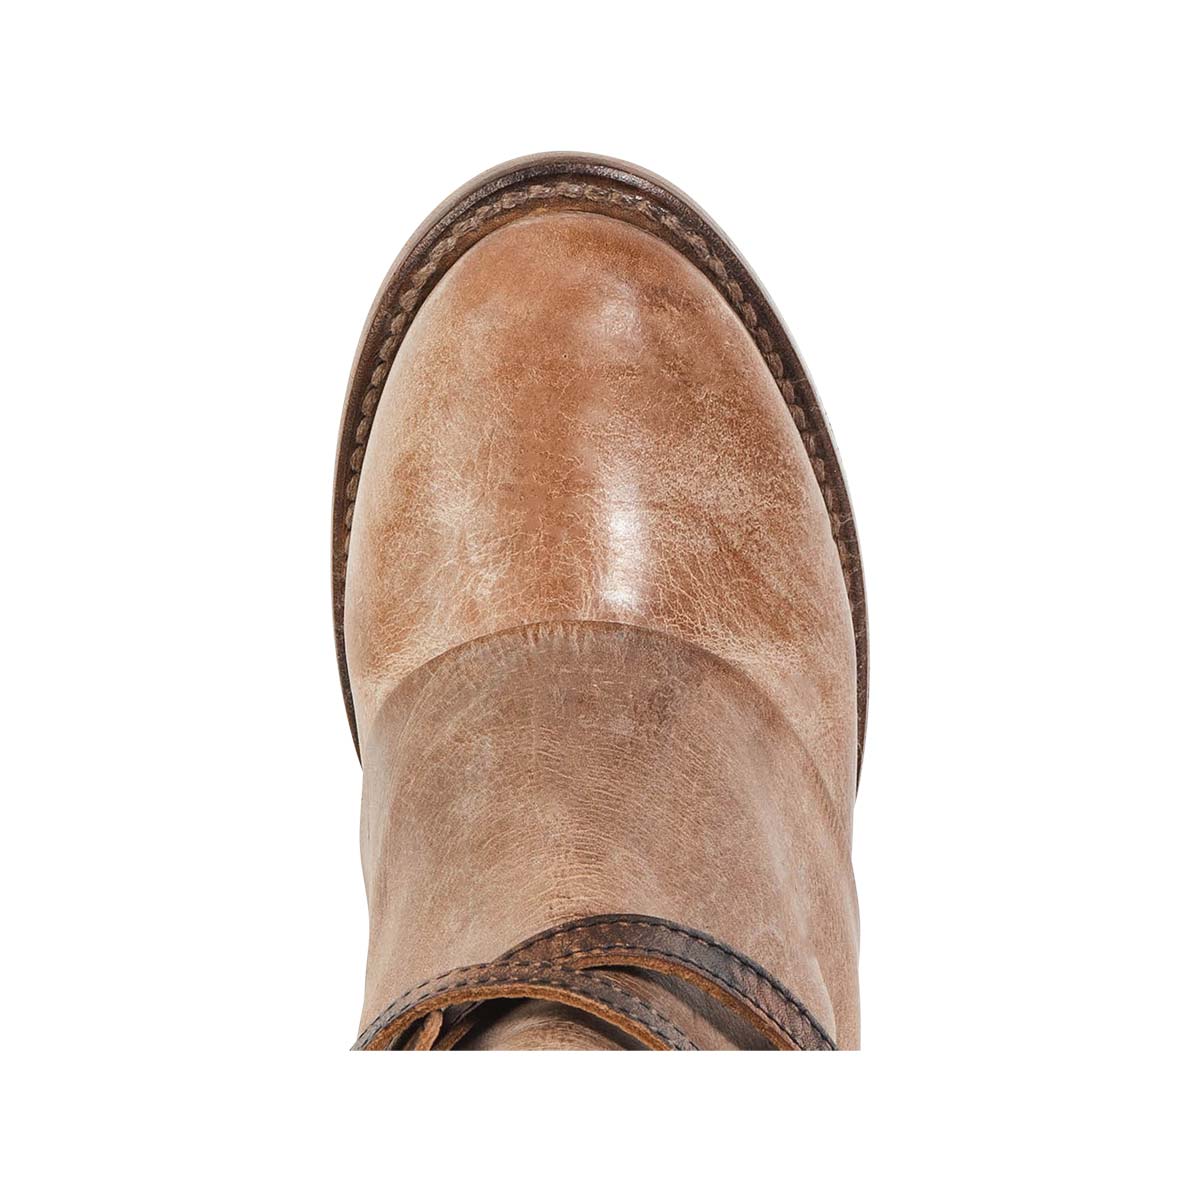 Top view showing round toe and leather ankle overlay on FREEBIRD women's Cassius beige multi tall leather boot